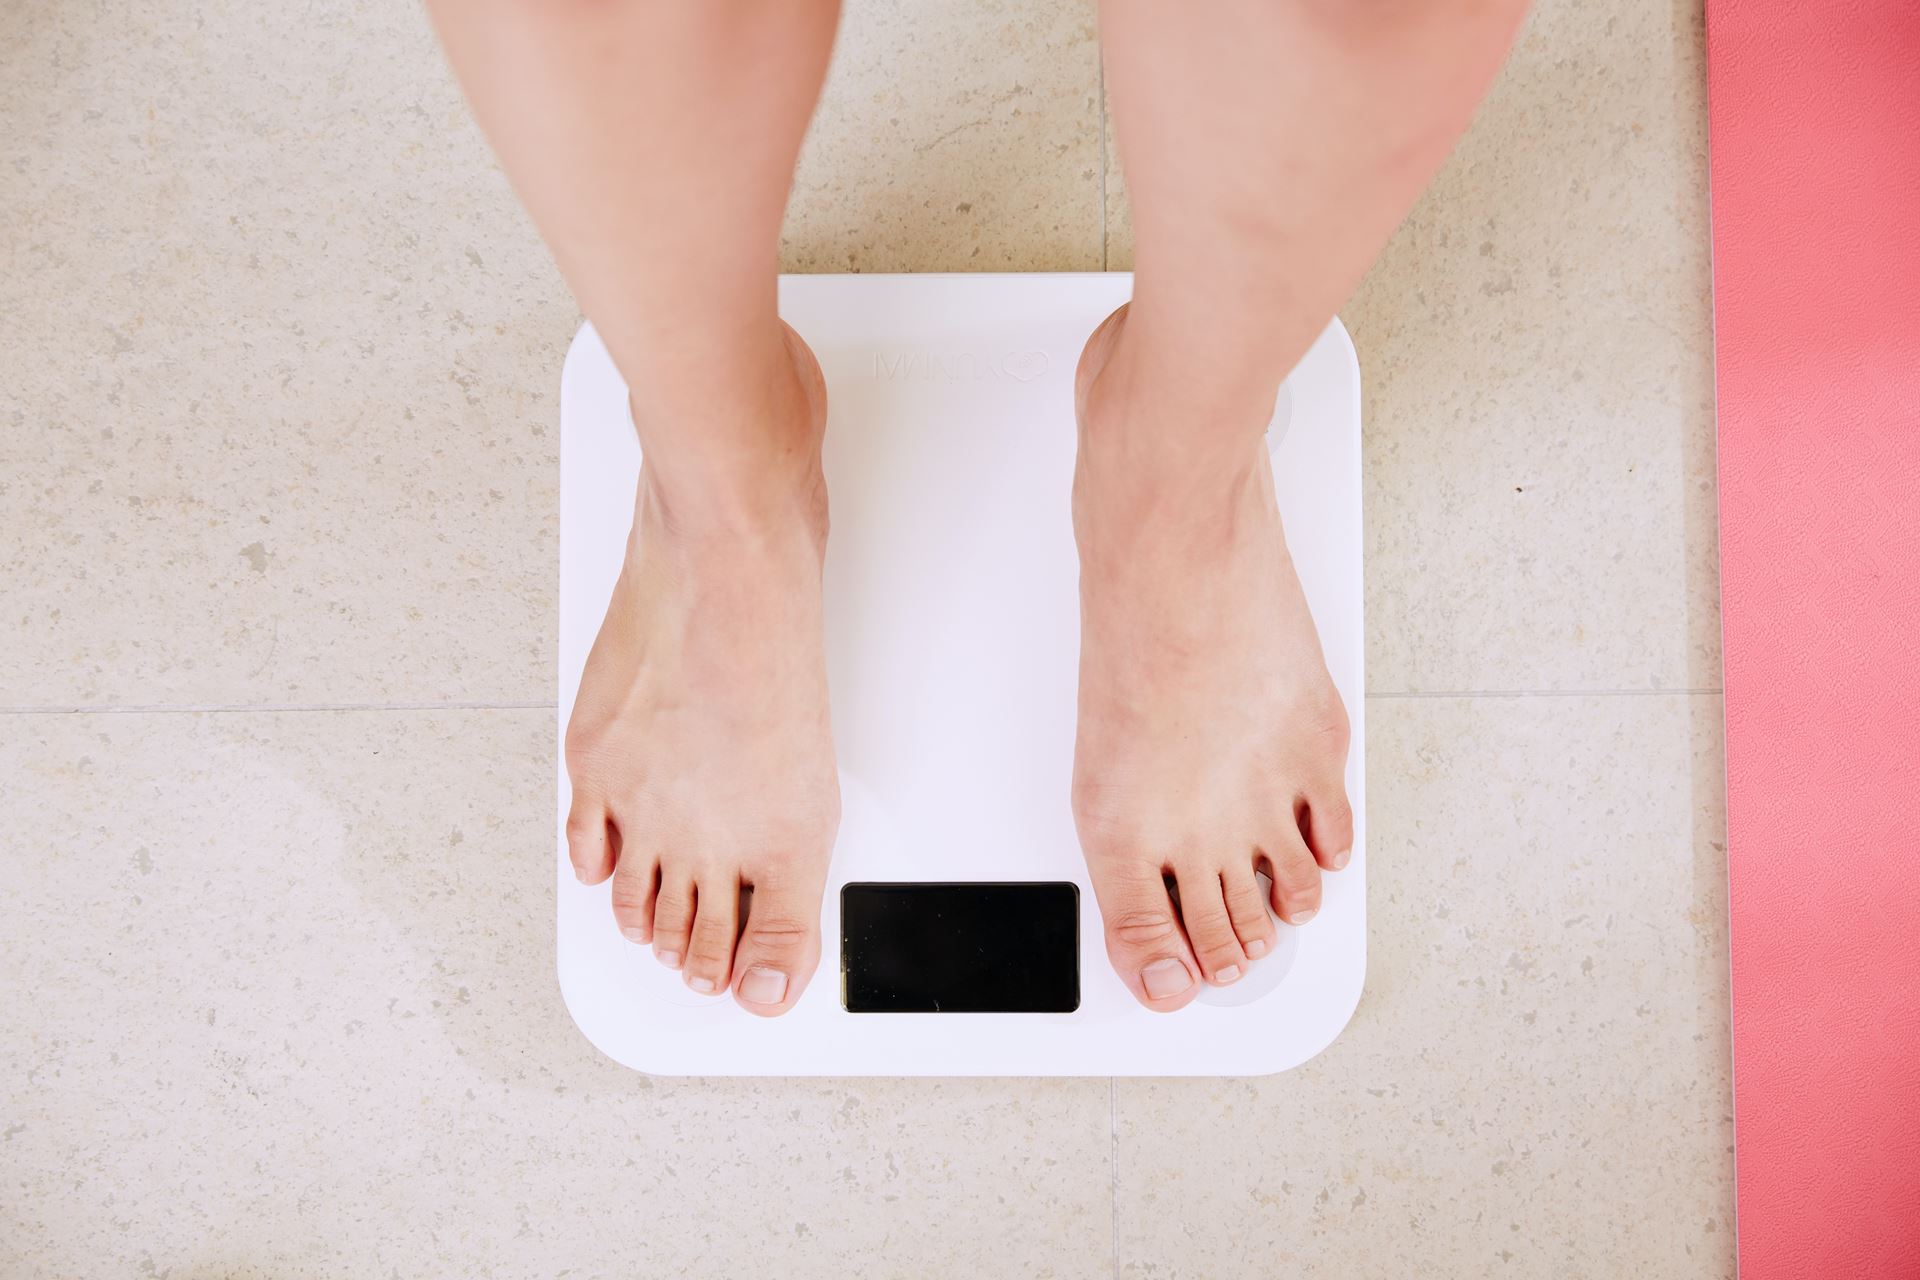 Barefoot on scales